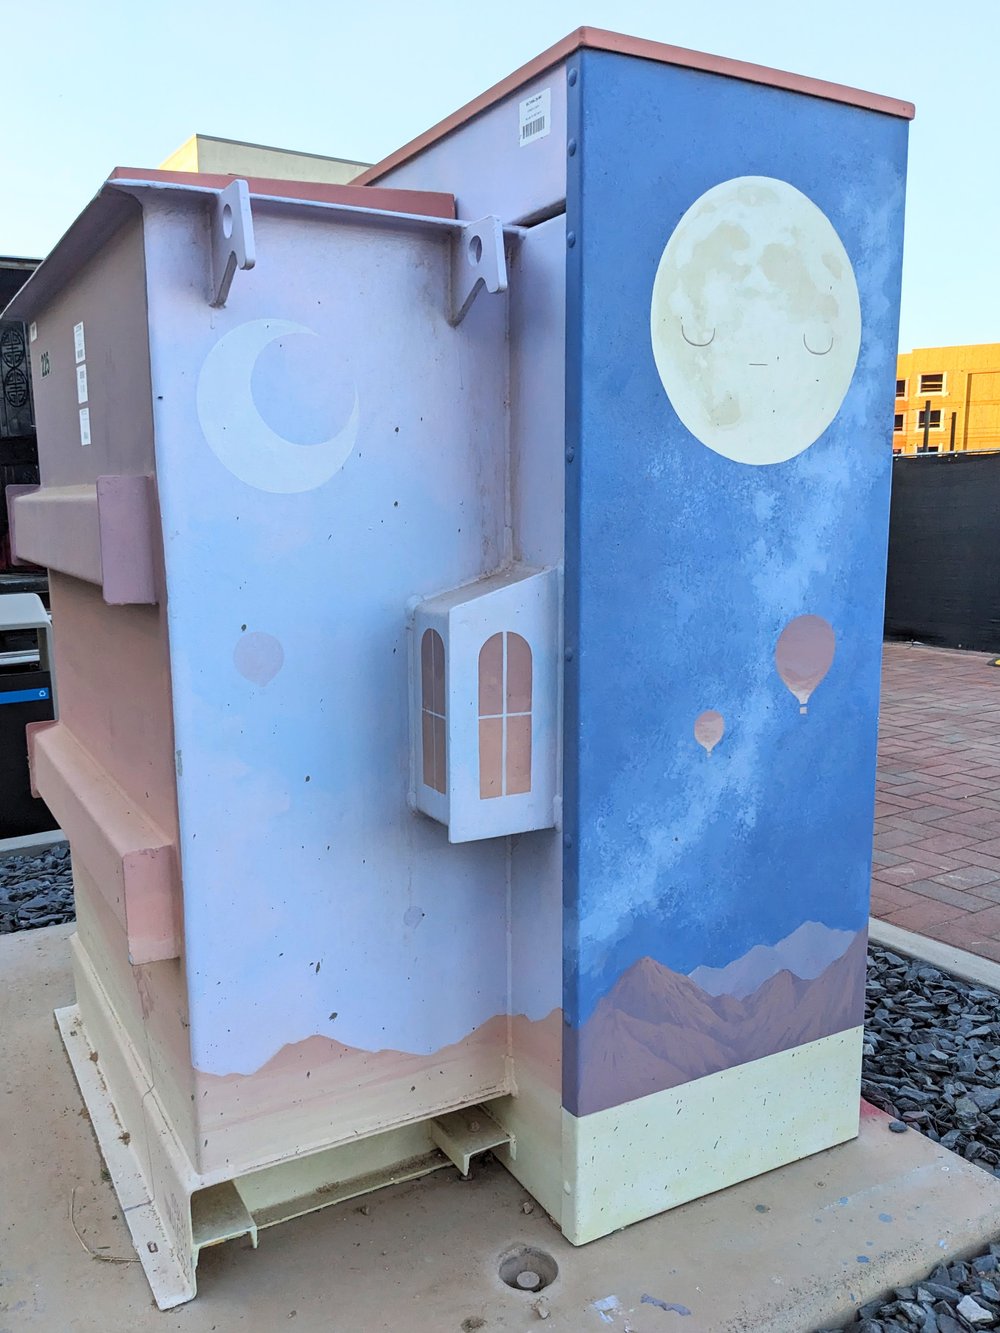 Whimsical murals by local artist on all of the utility boxes. :)